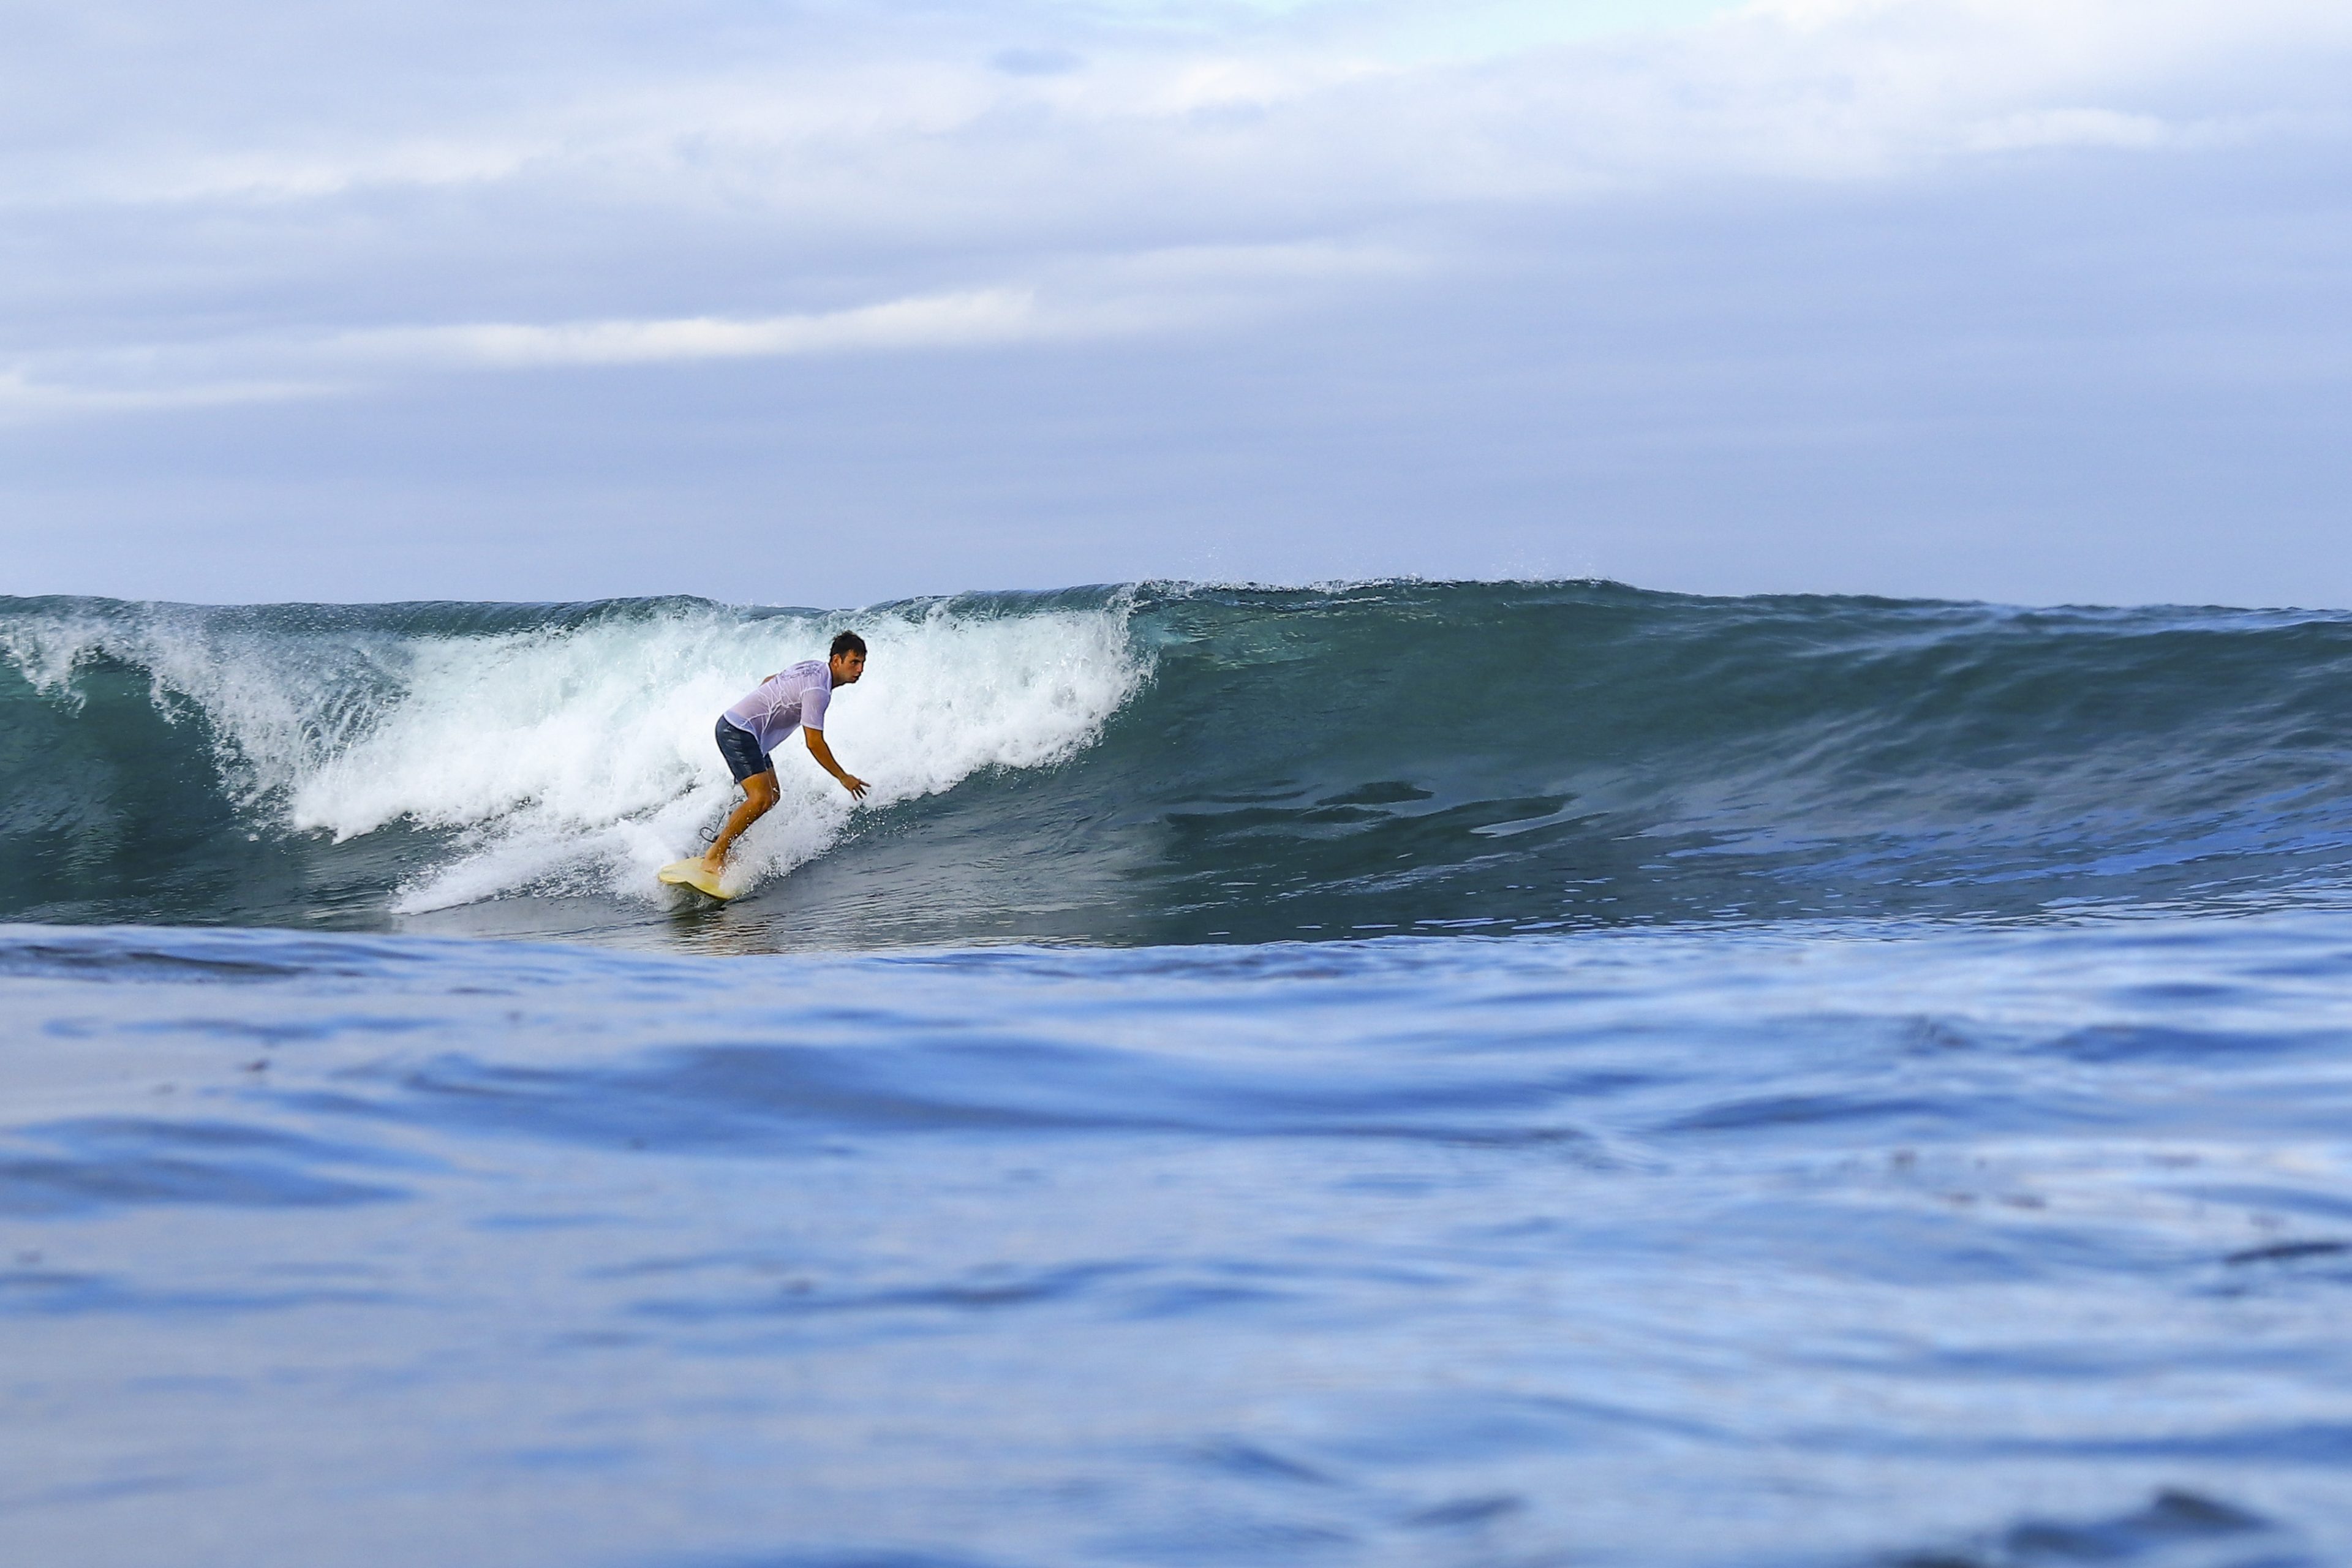 Surfer riding a wave at Middle Reef.